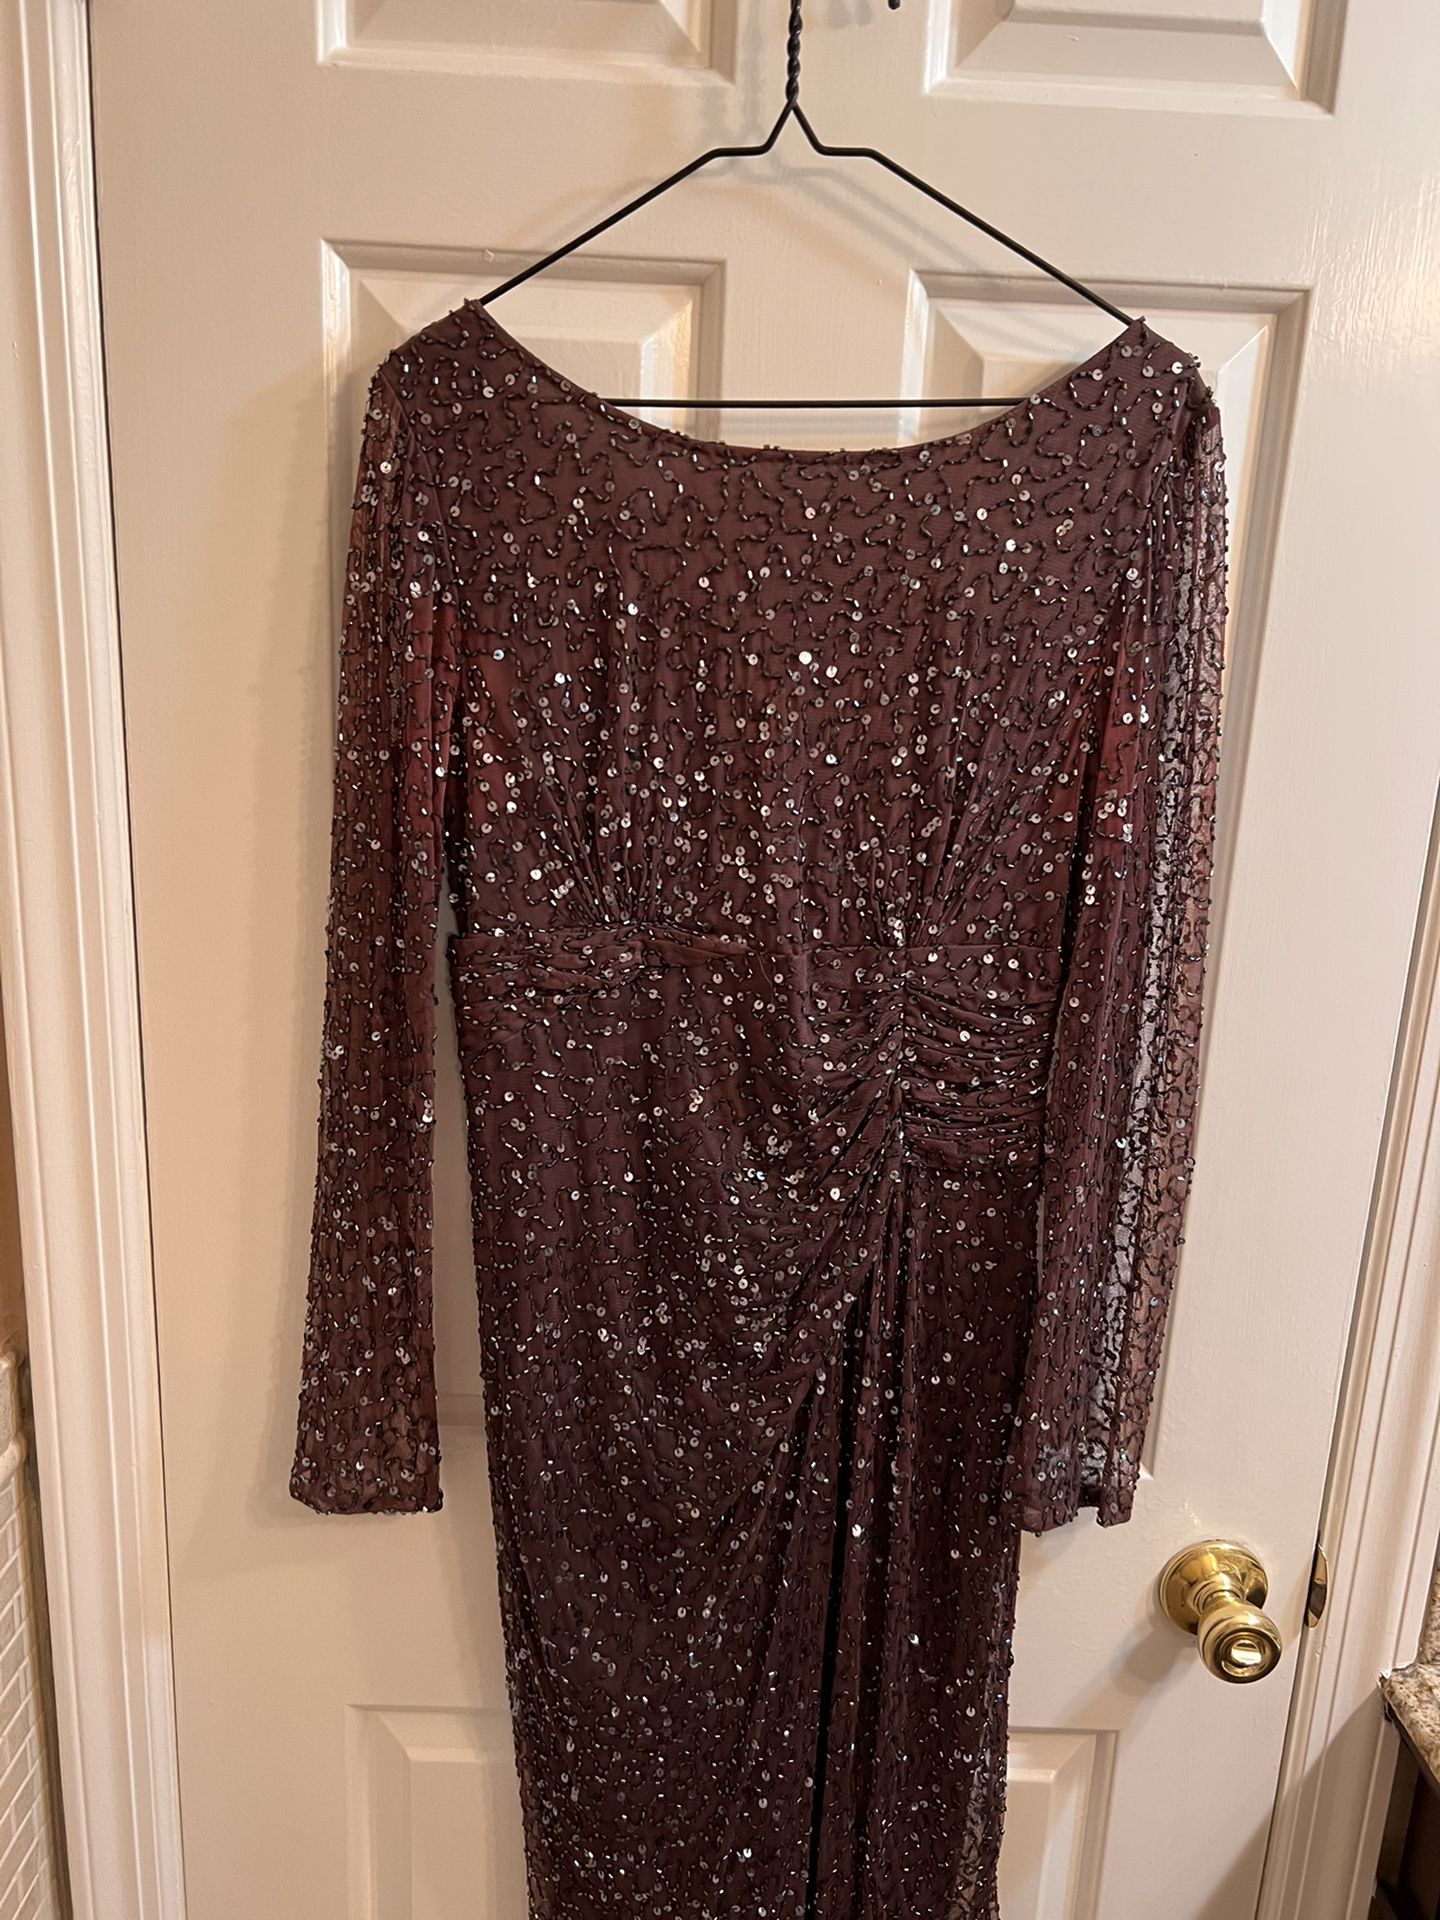 brown And Gold Sequence dress.